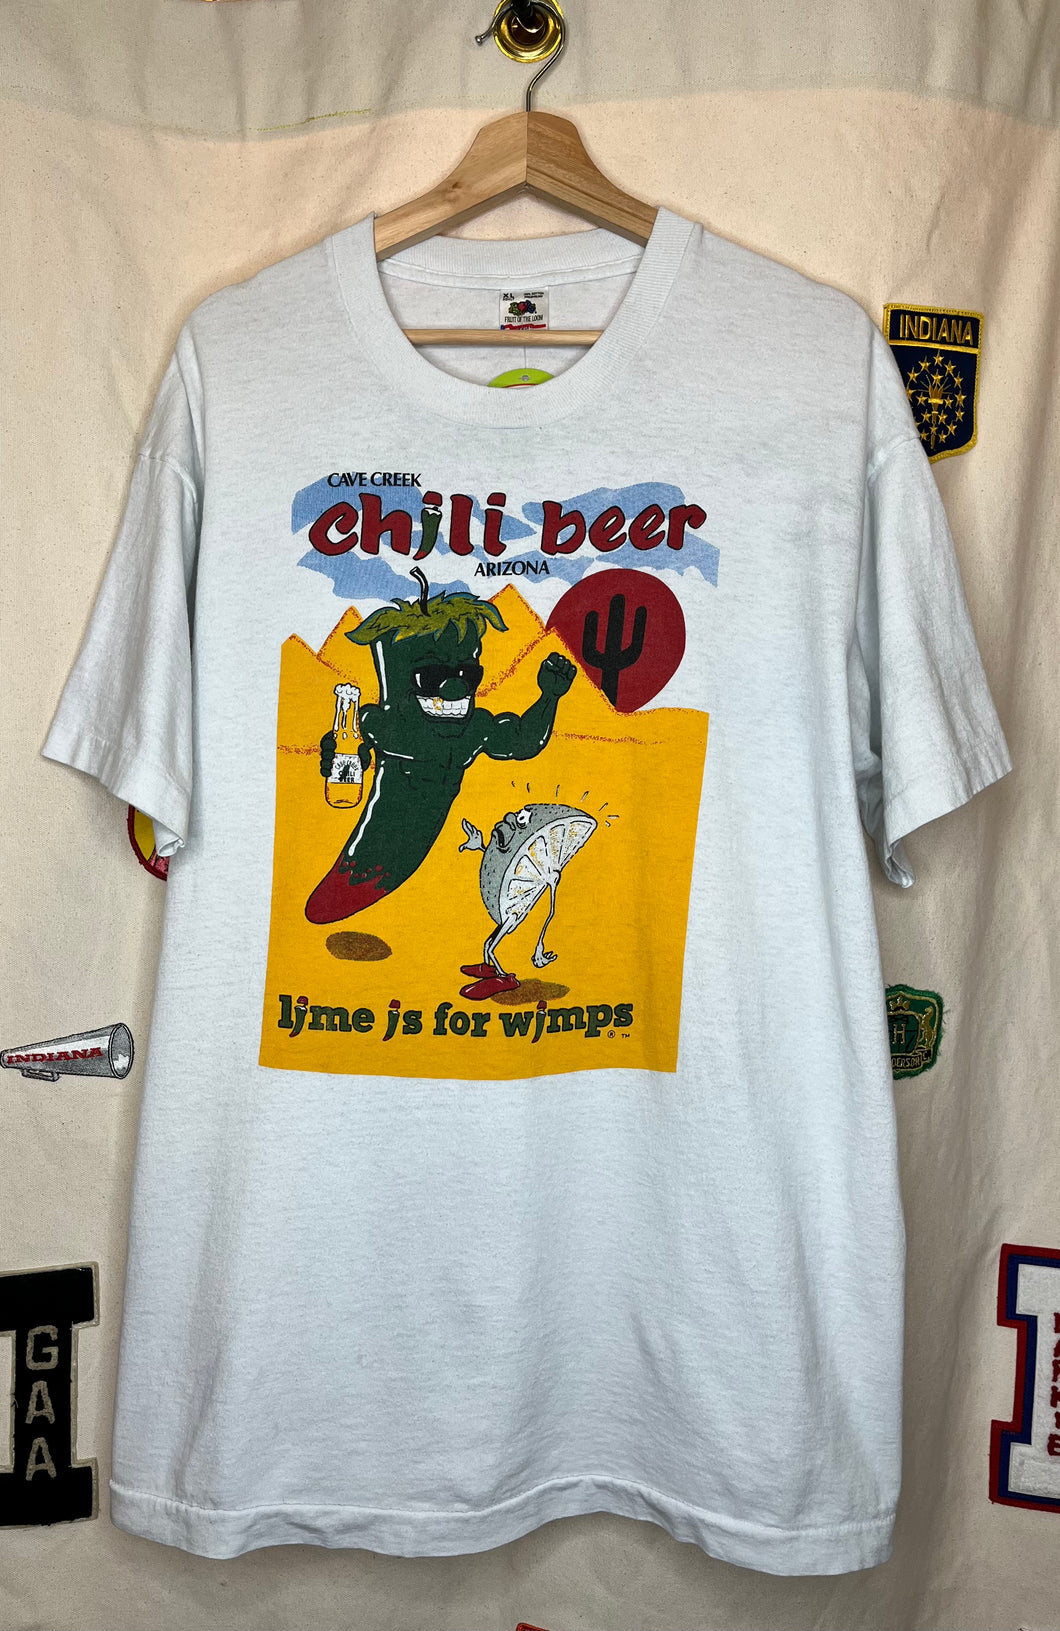 Vintage Chili Beer Cave Creek Arizona Lime is for Wimps T-Shirt: XL